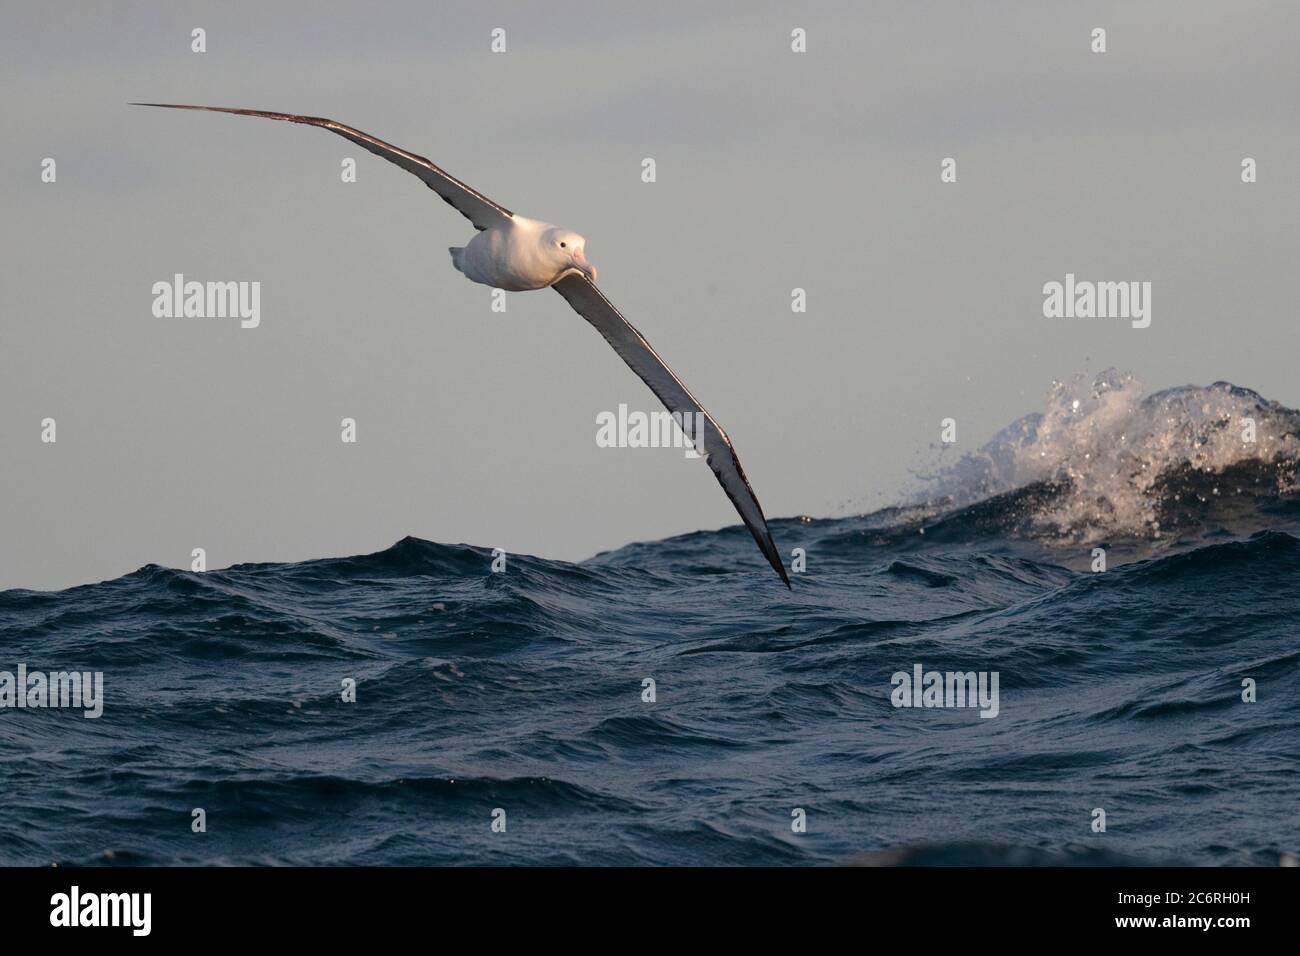 Norhern Royal Albatross (Diomedea sanfordi) front view, flying low over Humboldt Current, southeast Pacific Ocean, near Chile 26 Feb 2020 Stock Photo